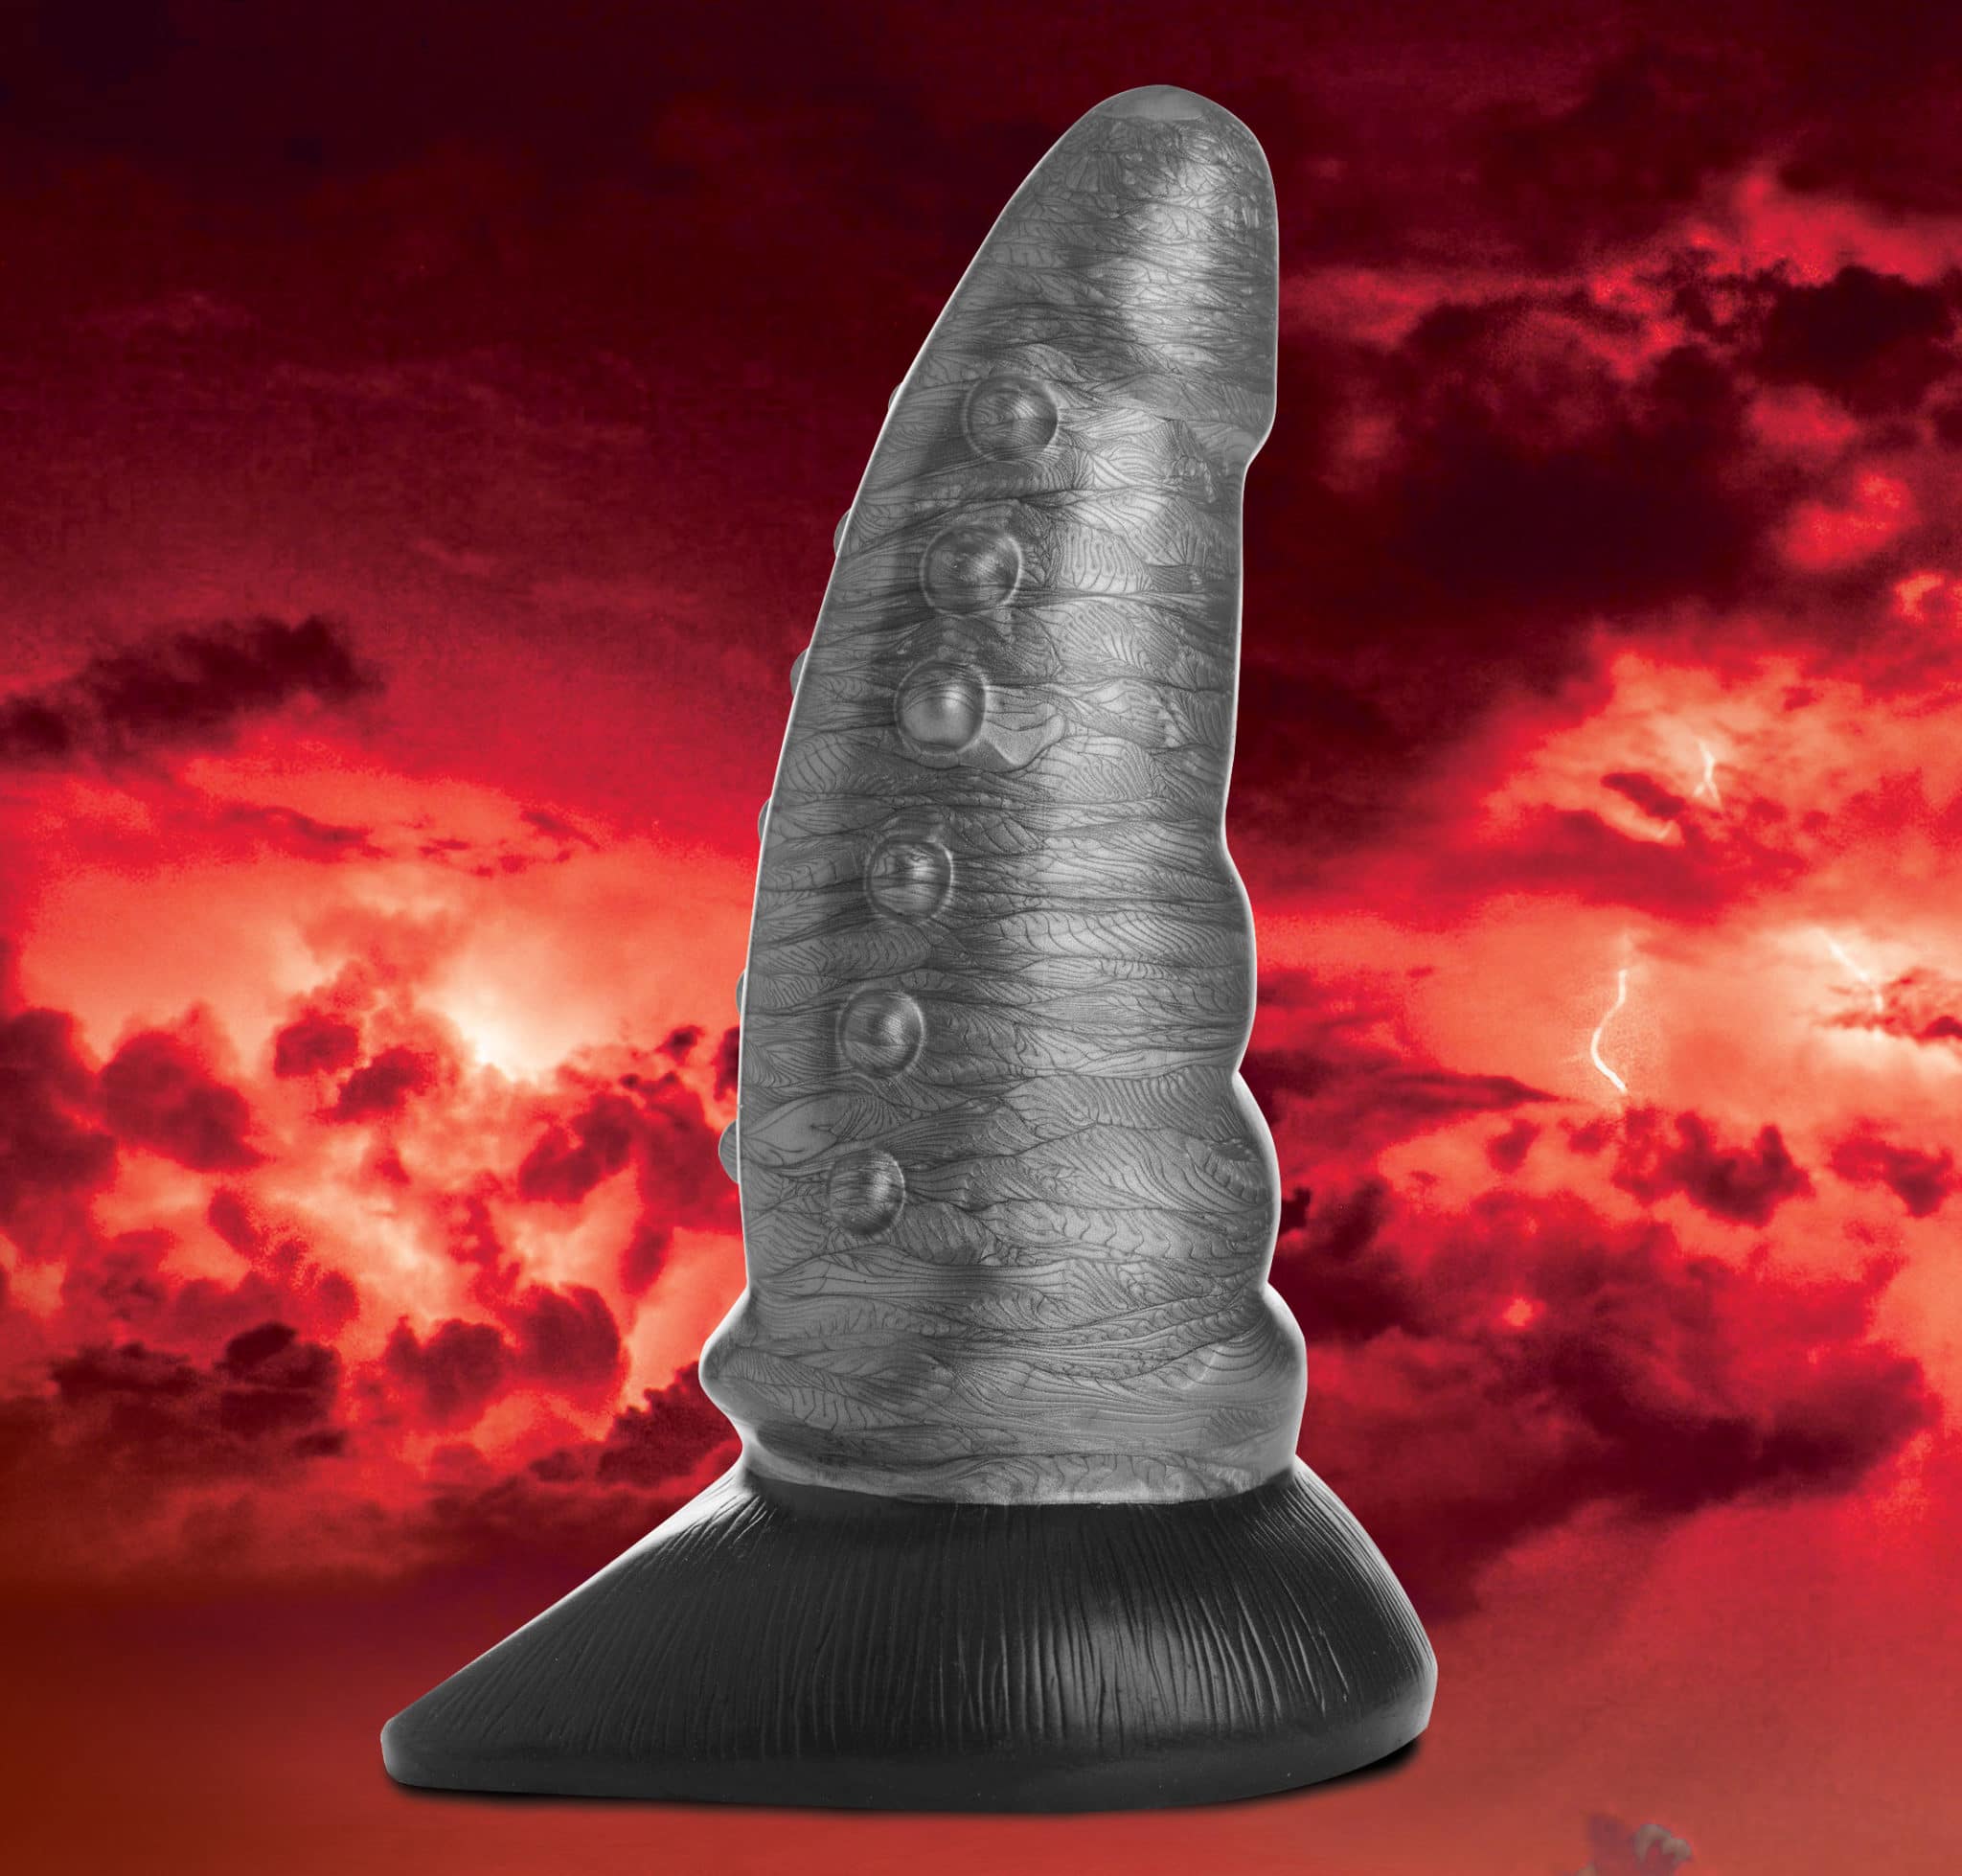 Beastly Tapered Bumpy Silicone Dildo-4